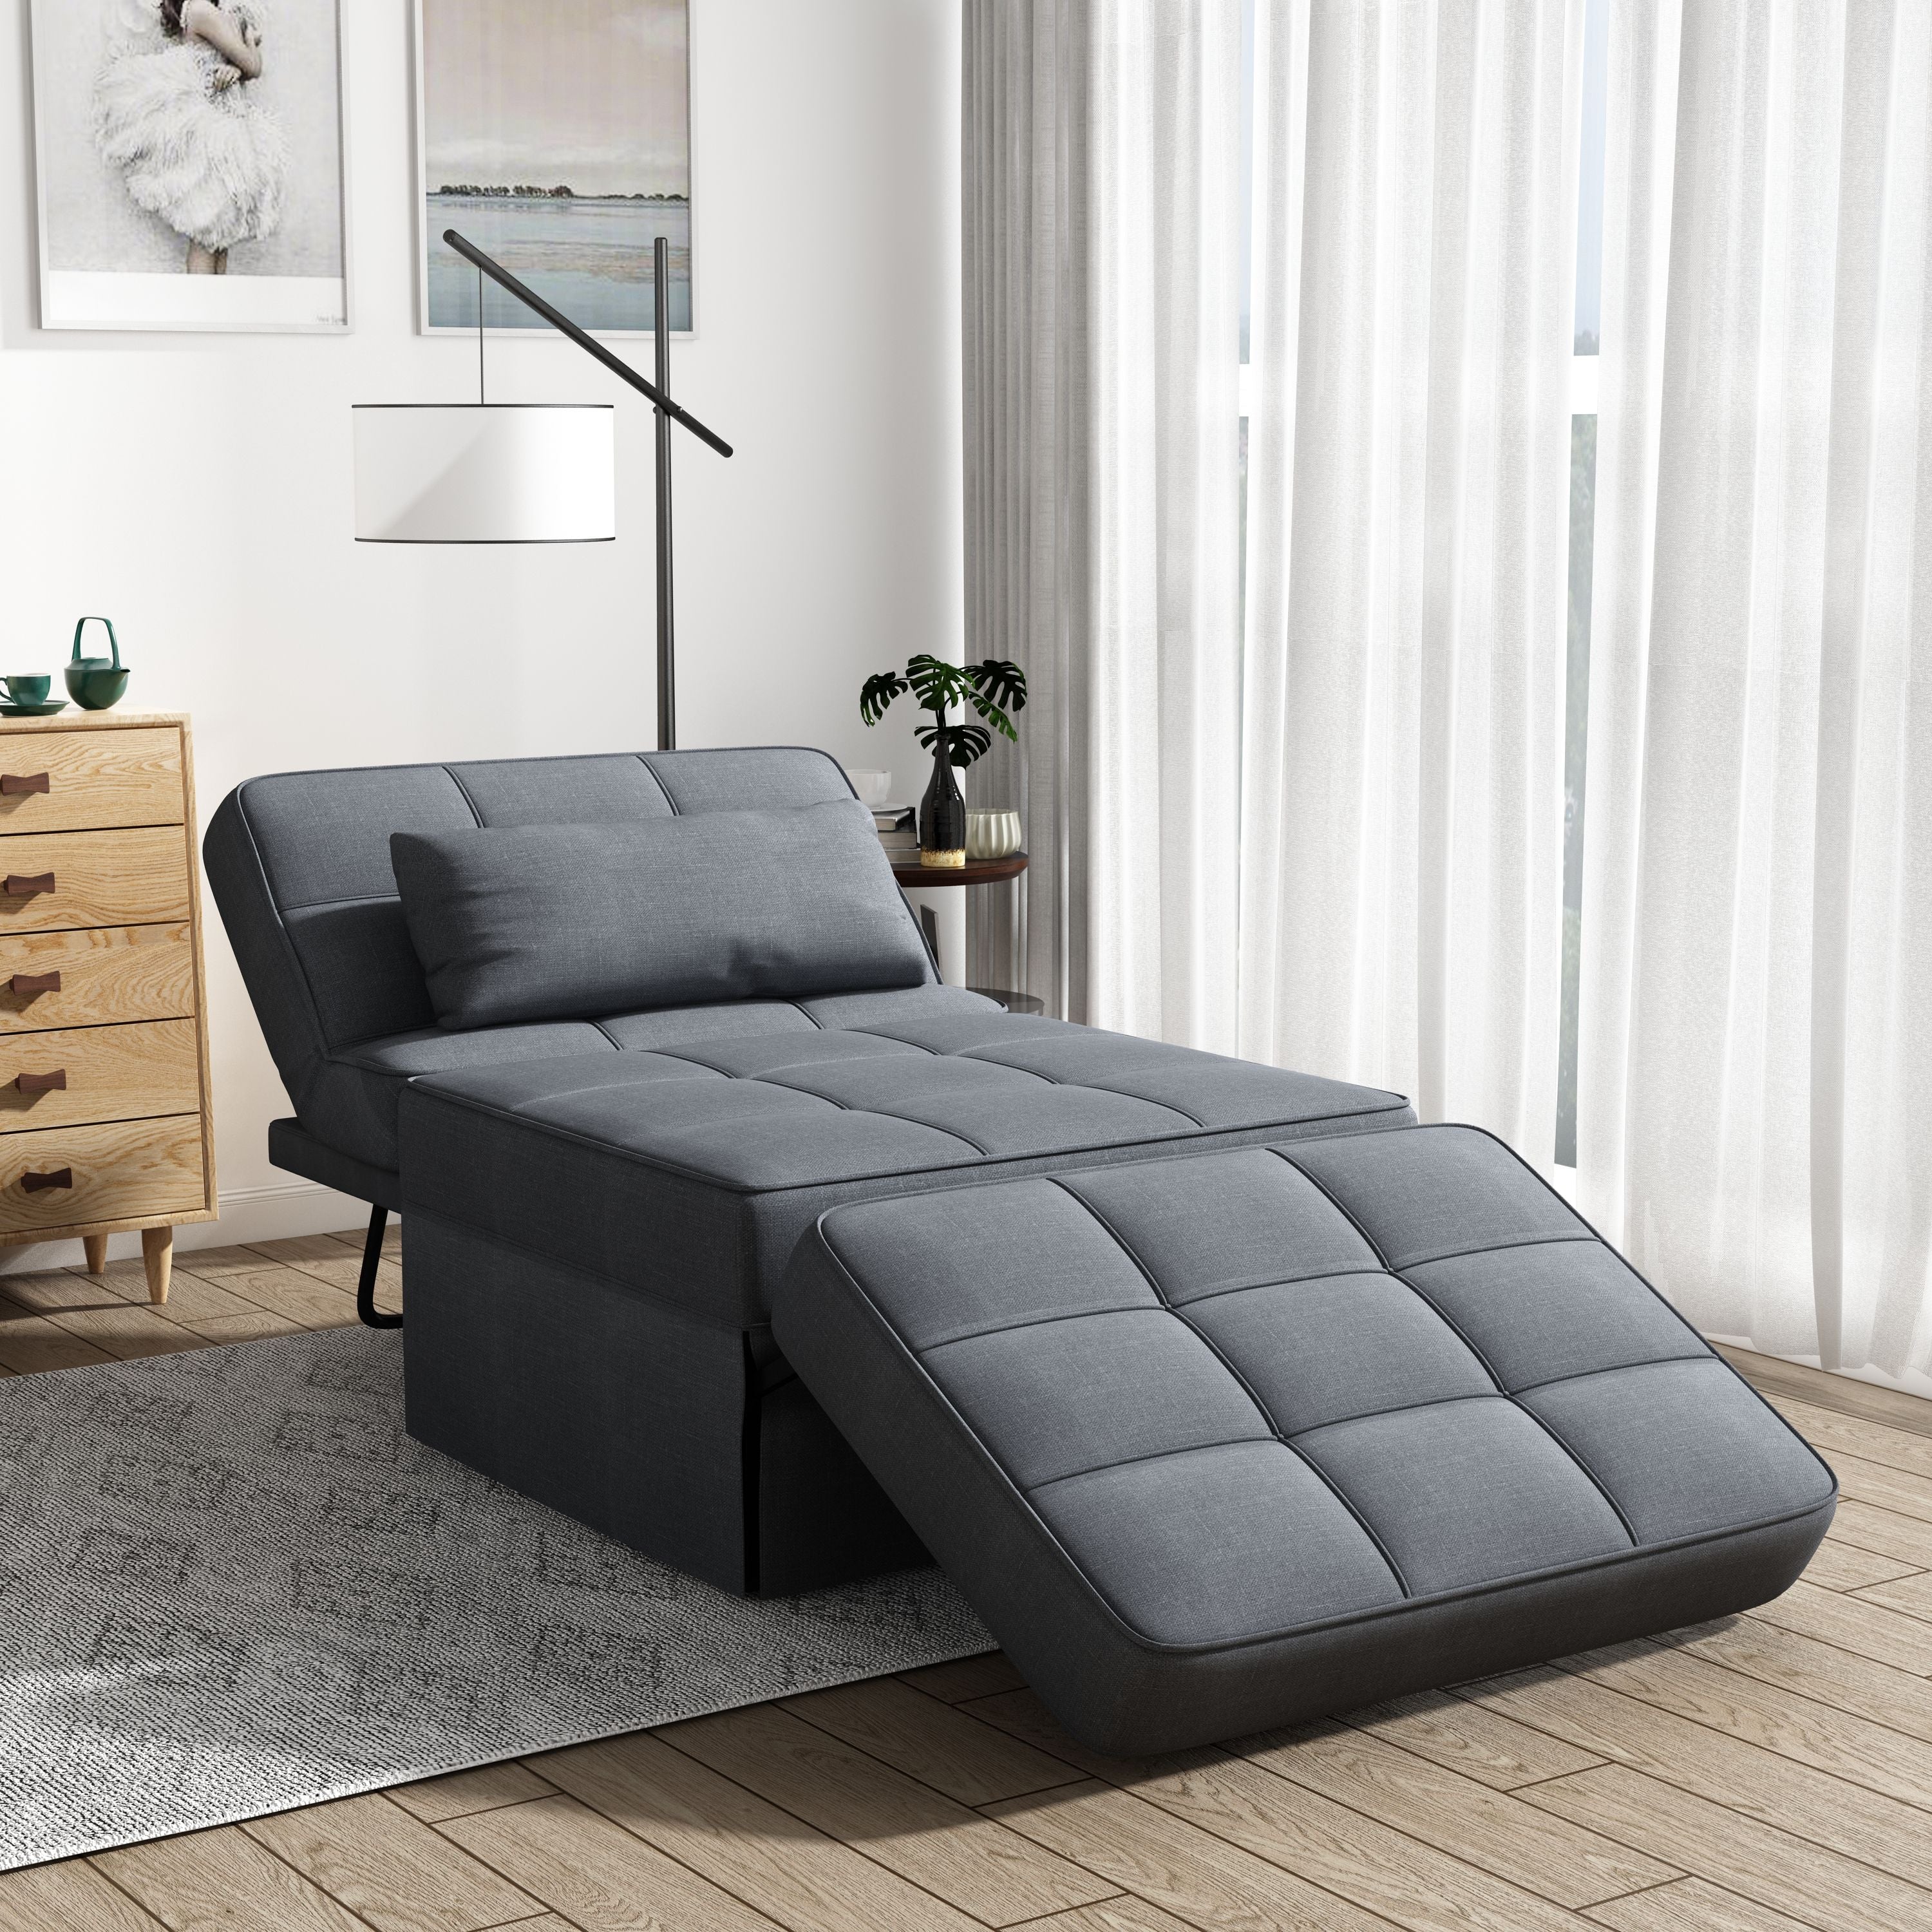 Bed Room Metal Frame With Dark Gray Upholstery Recliner Bed Ottoman